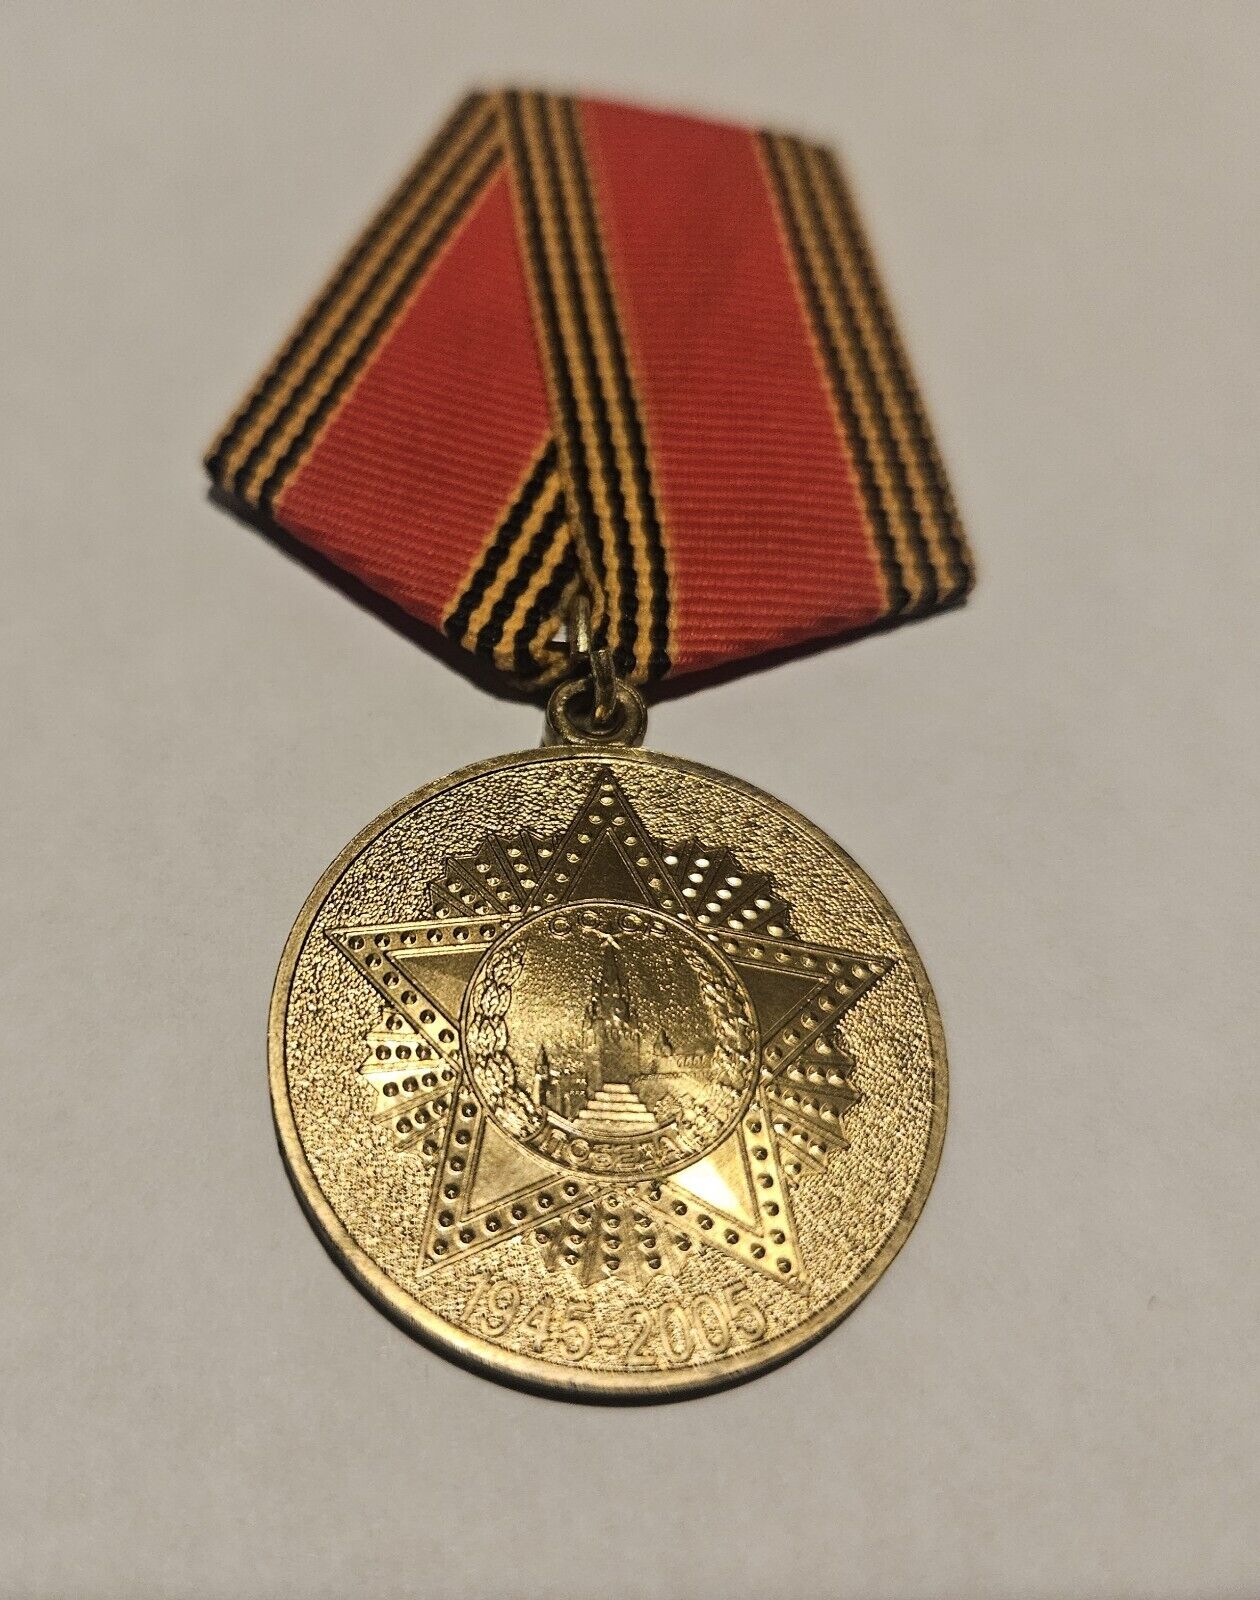 Russian Medal Celebrating The 60th Anniversary Of The End Of WW2 1945-2005 